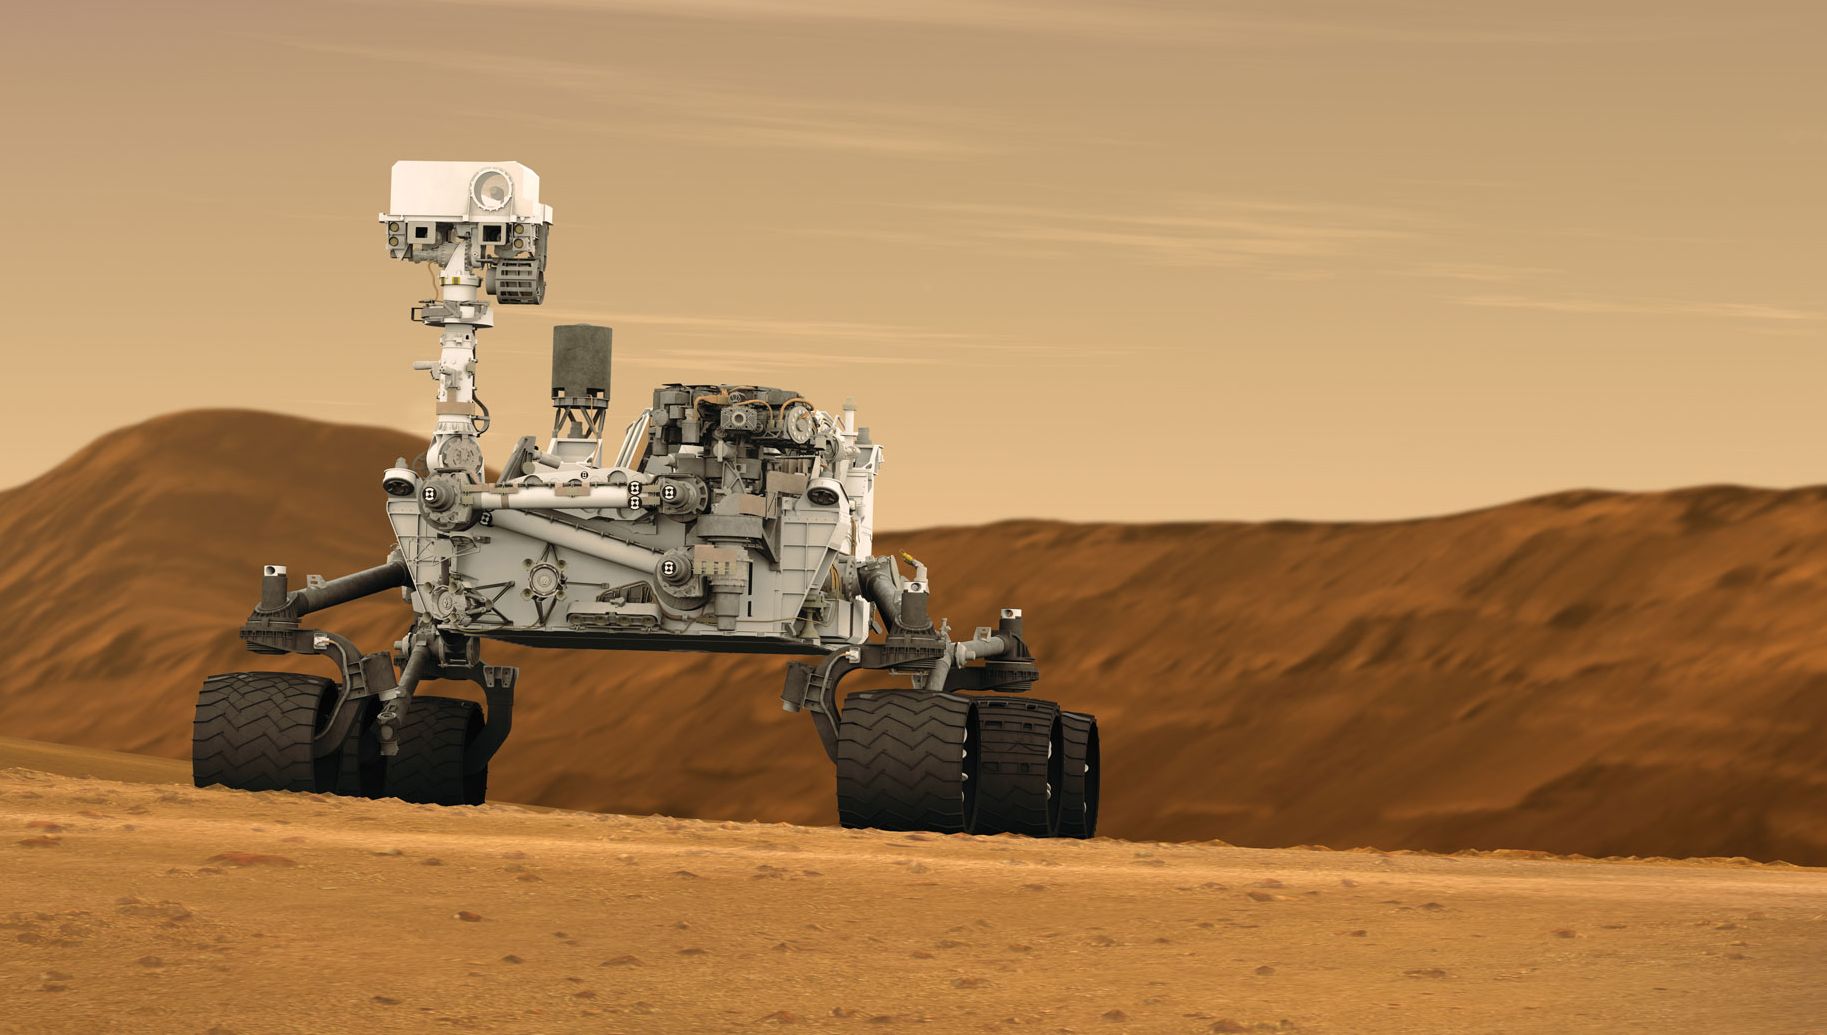 Curiosity Rover has acquired artificial intelligence